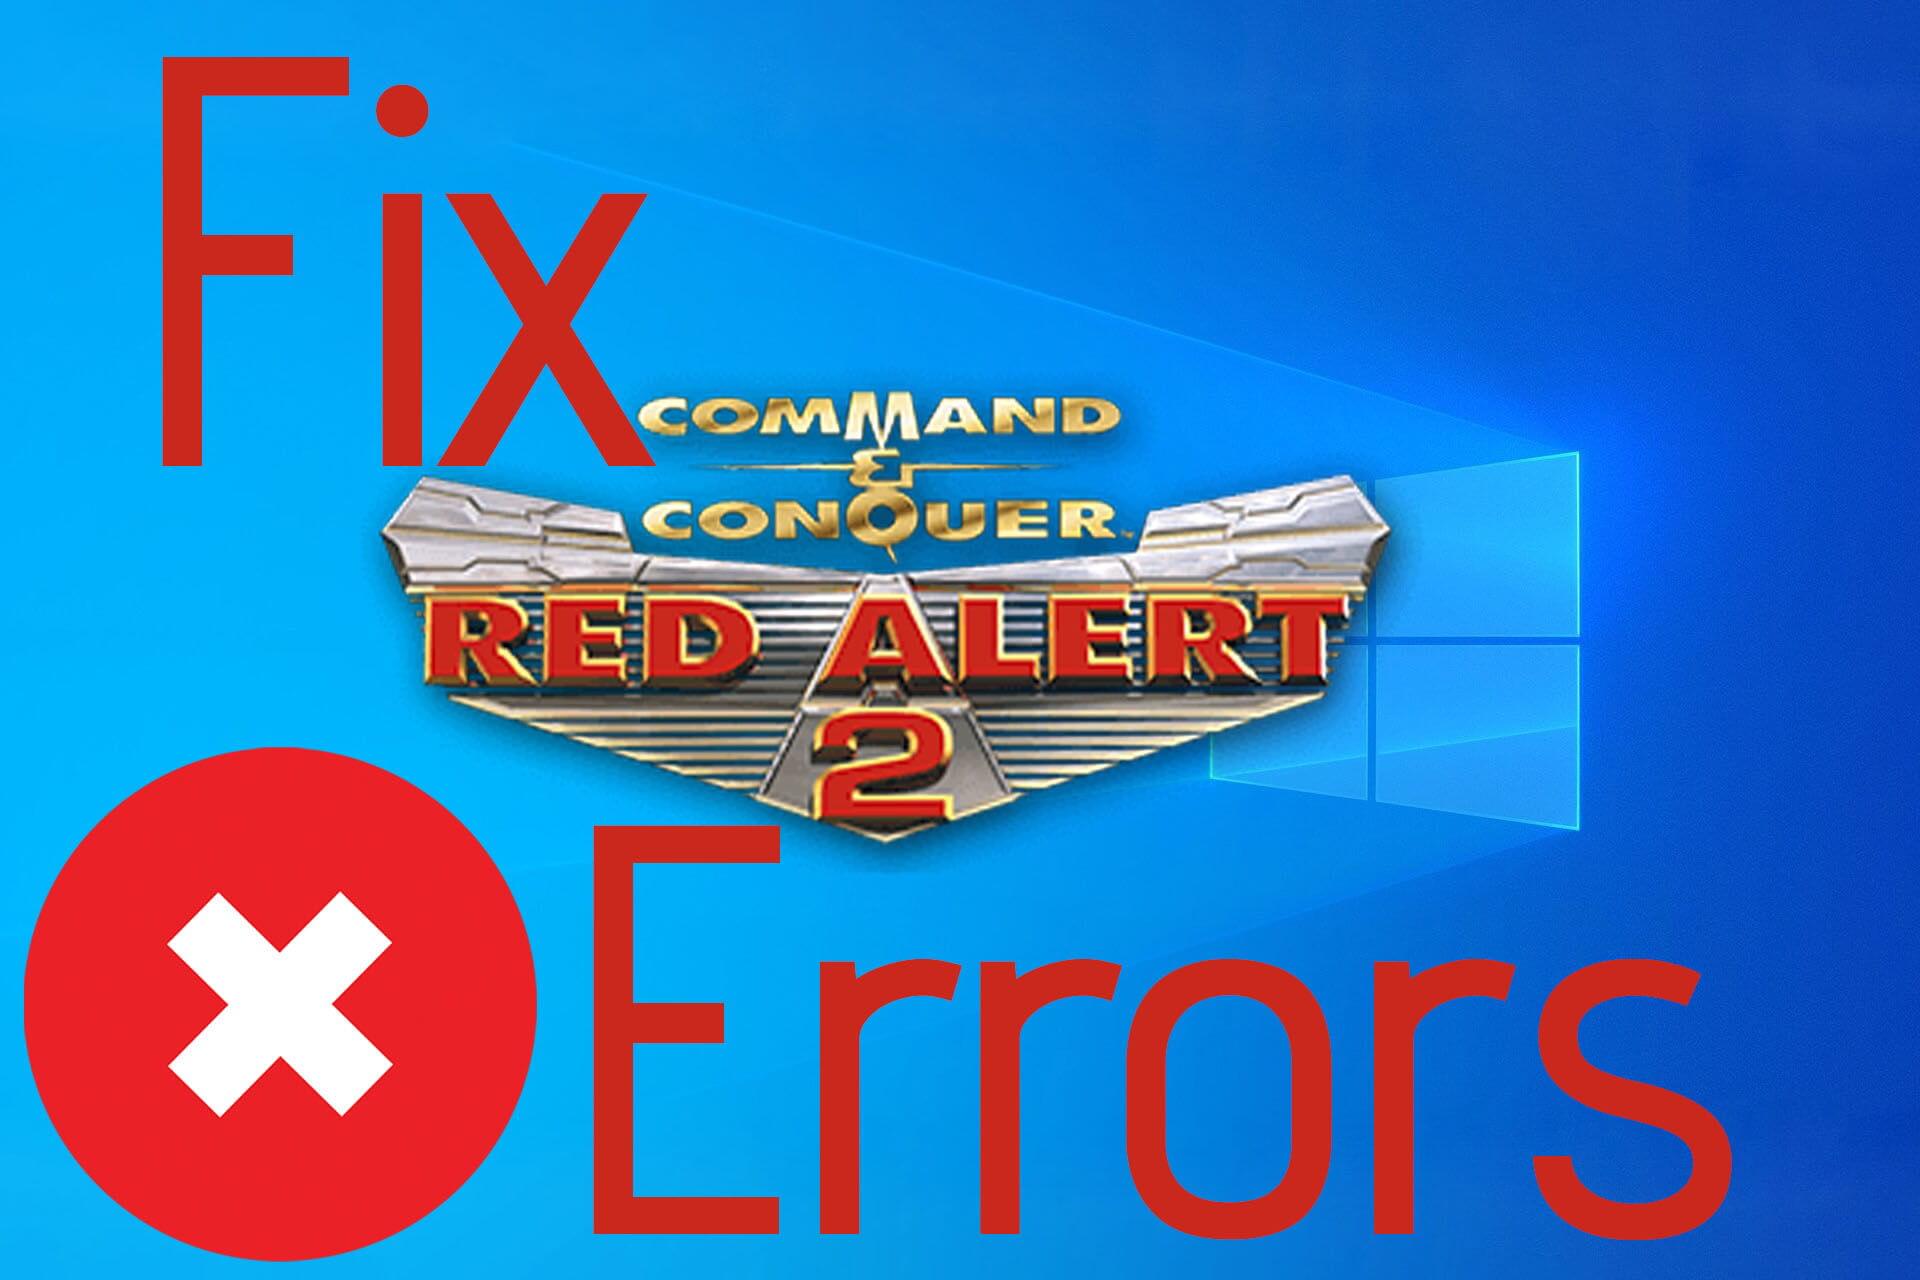 How to Red issues in Windows 10/11